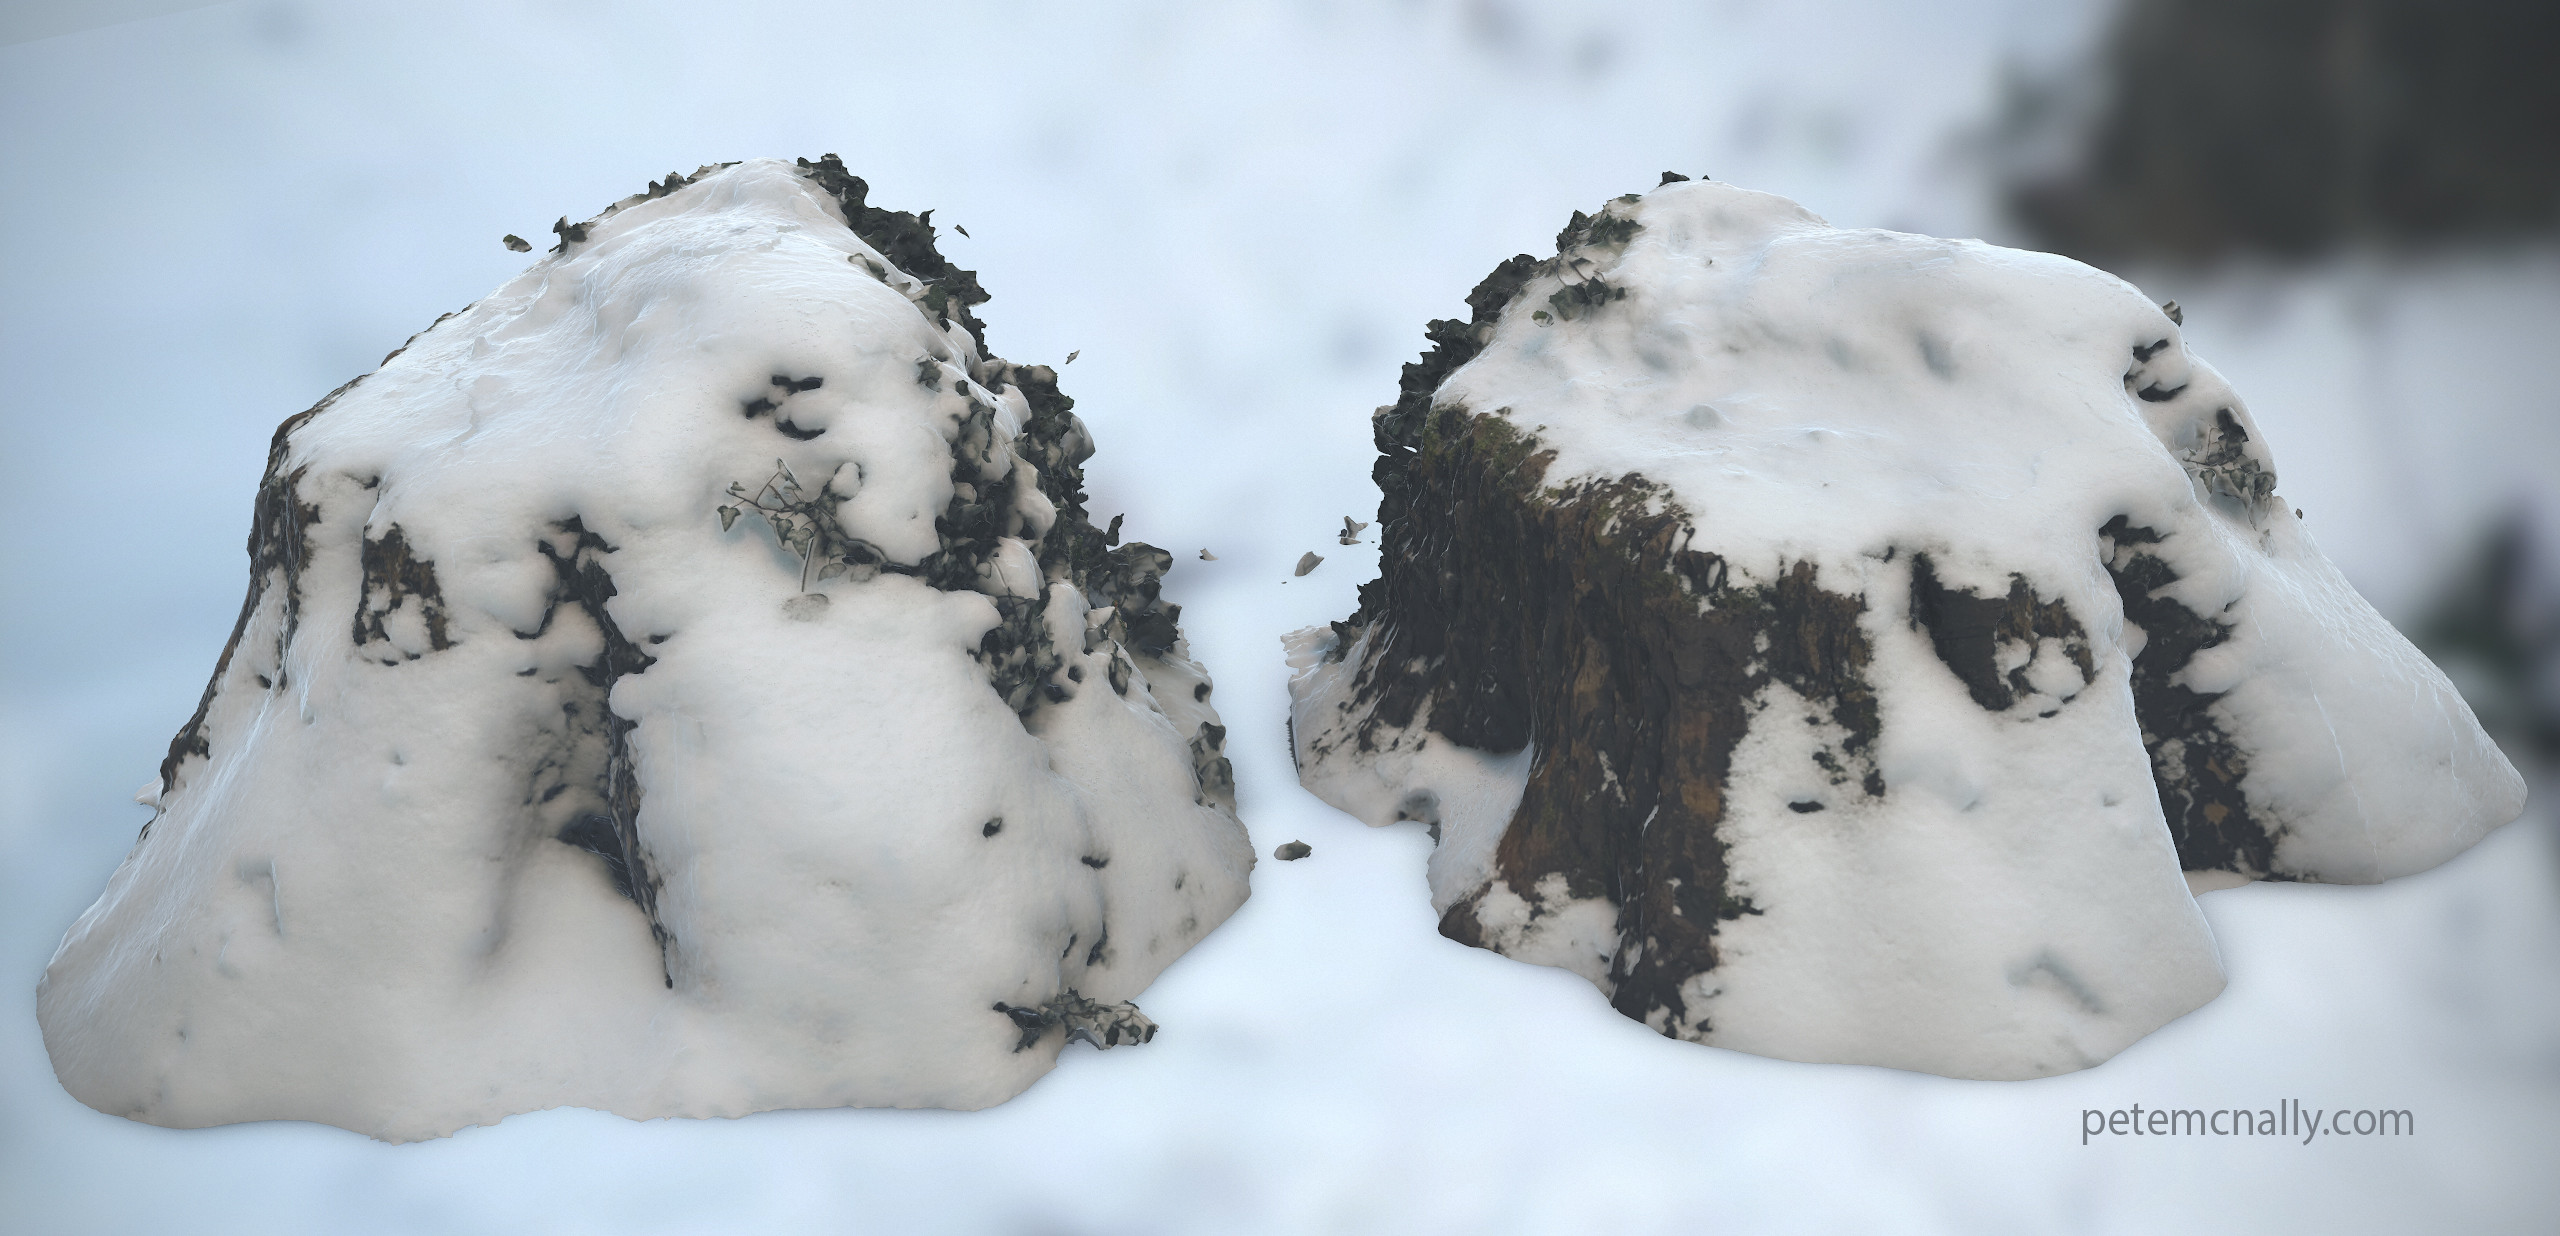 Powdery snow covered tree stump. I also created the HDRI environment used for lighting here